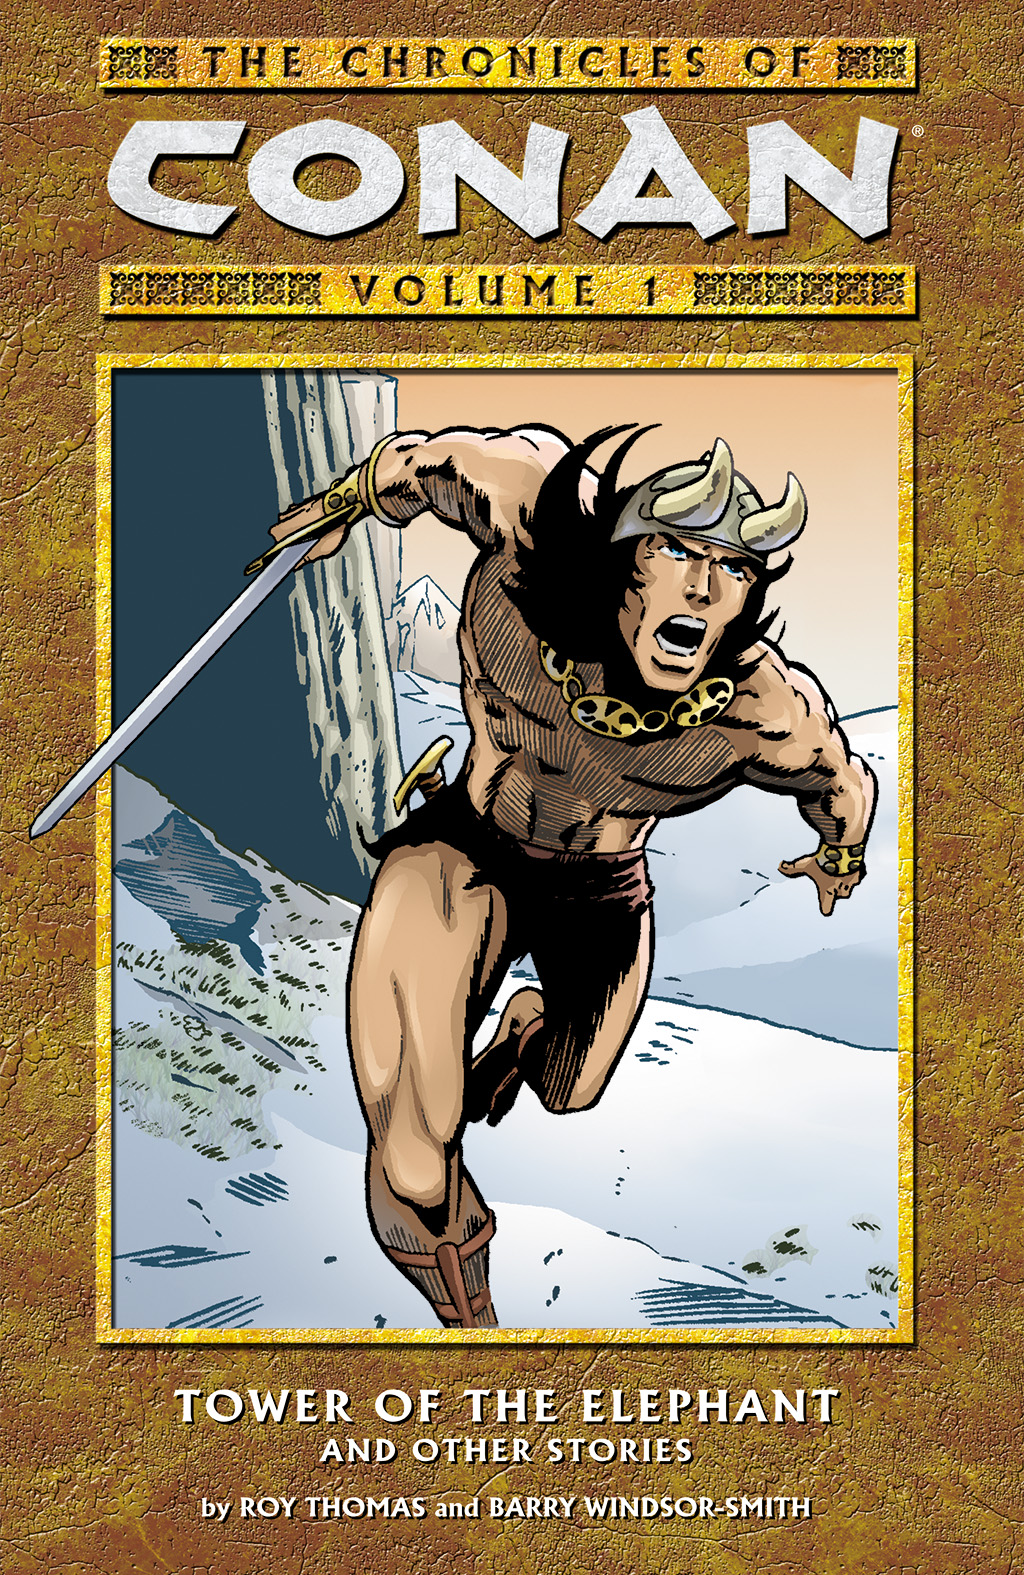 Read online The Chronicles of Conan comic -  Issue # TPB 1 (Part 1) - 1